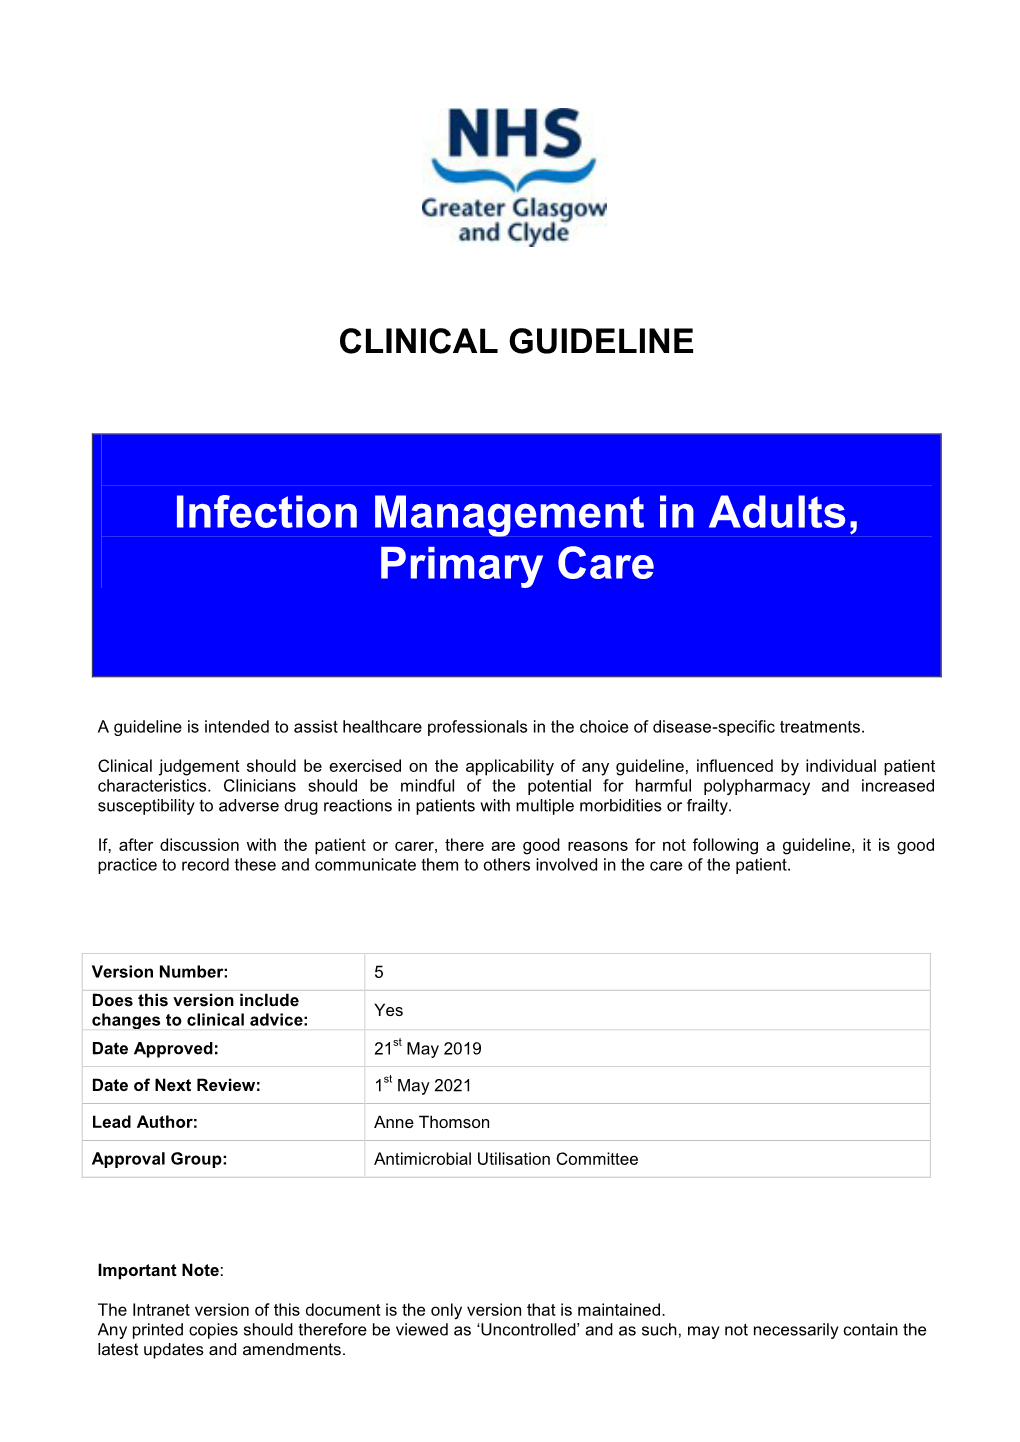 Infection Management in Adults, Primary Care